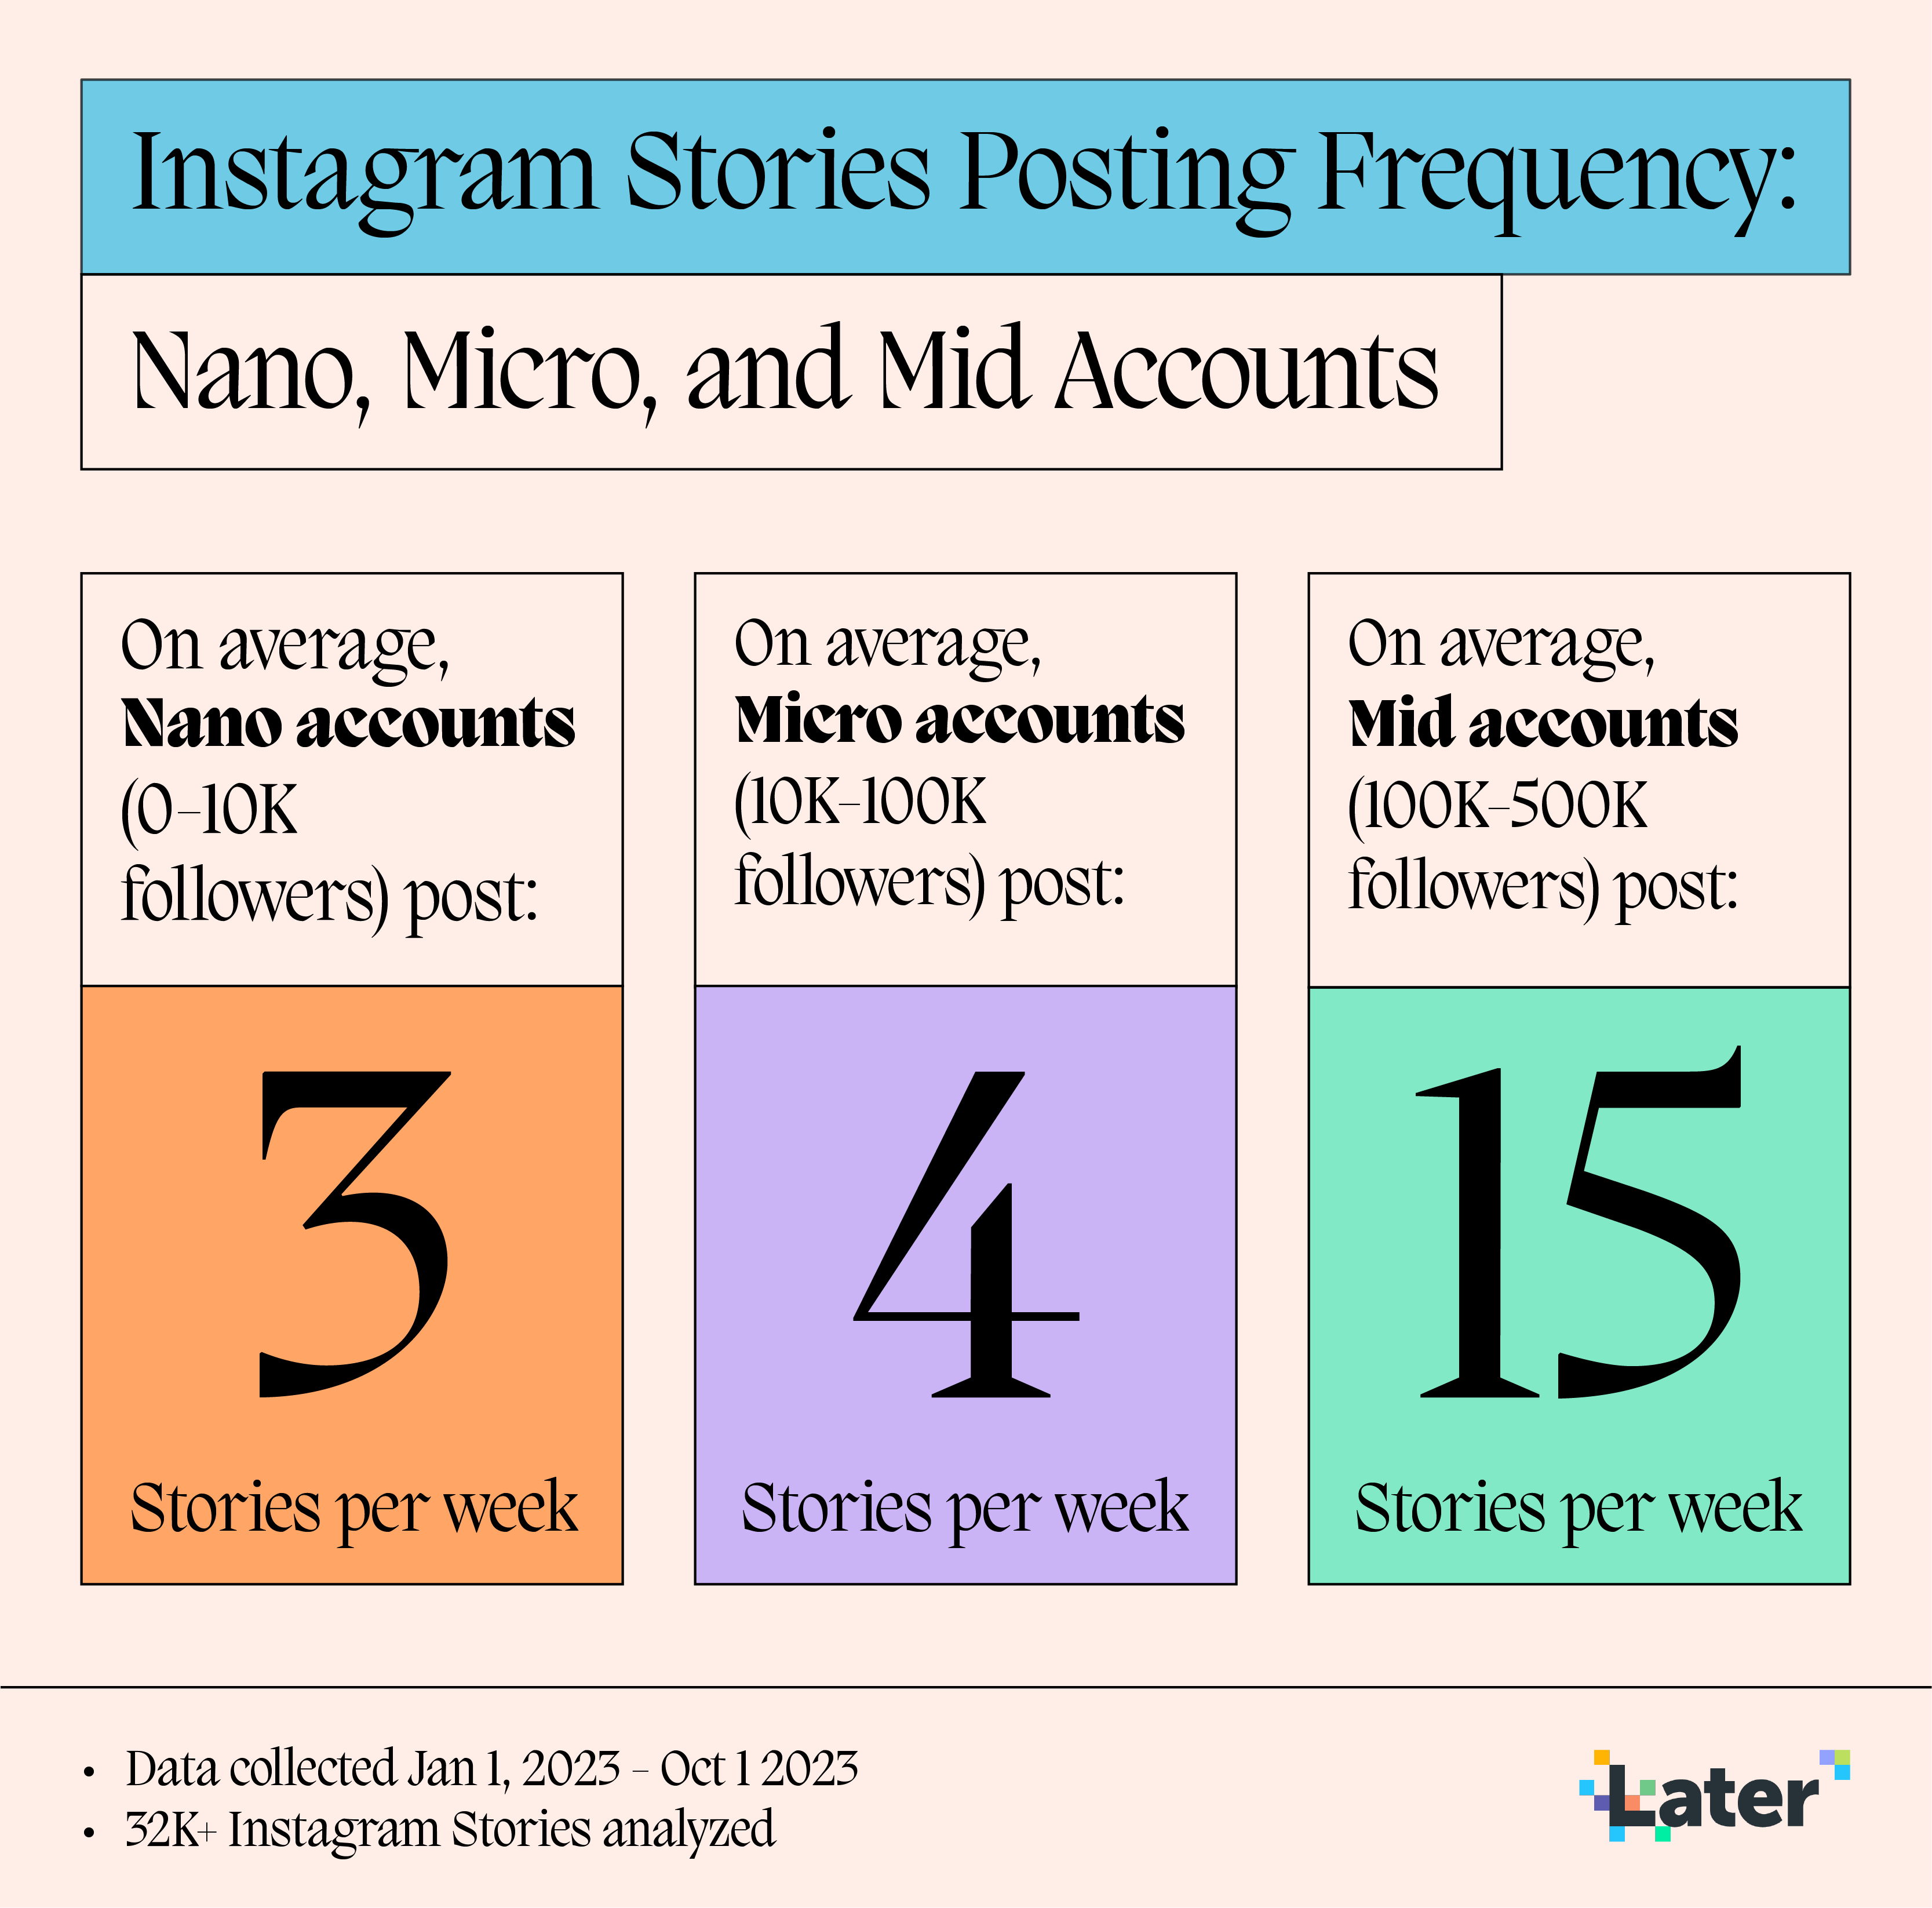 Graphic showing how often Nano, Micro, and Mid accounts post Instagram Stories every week